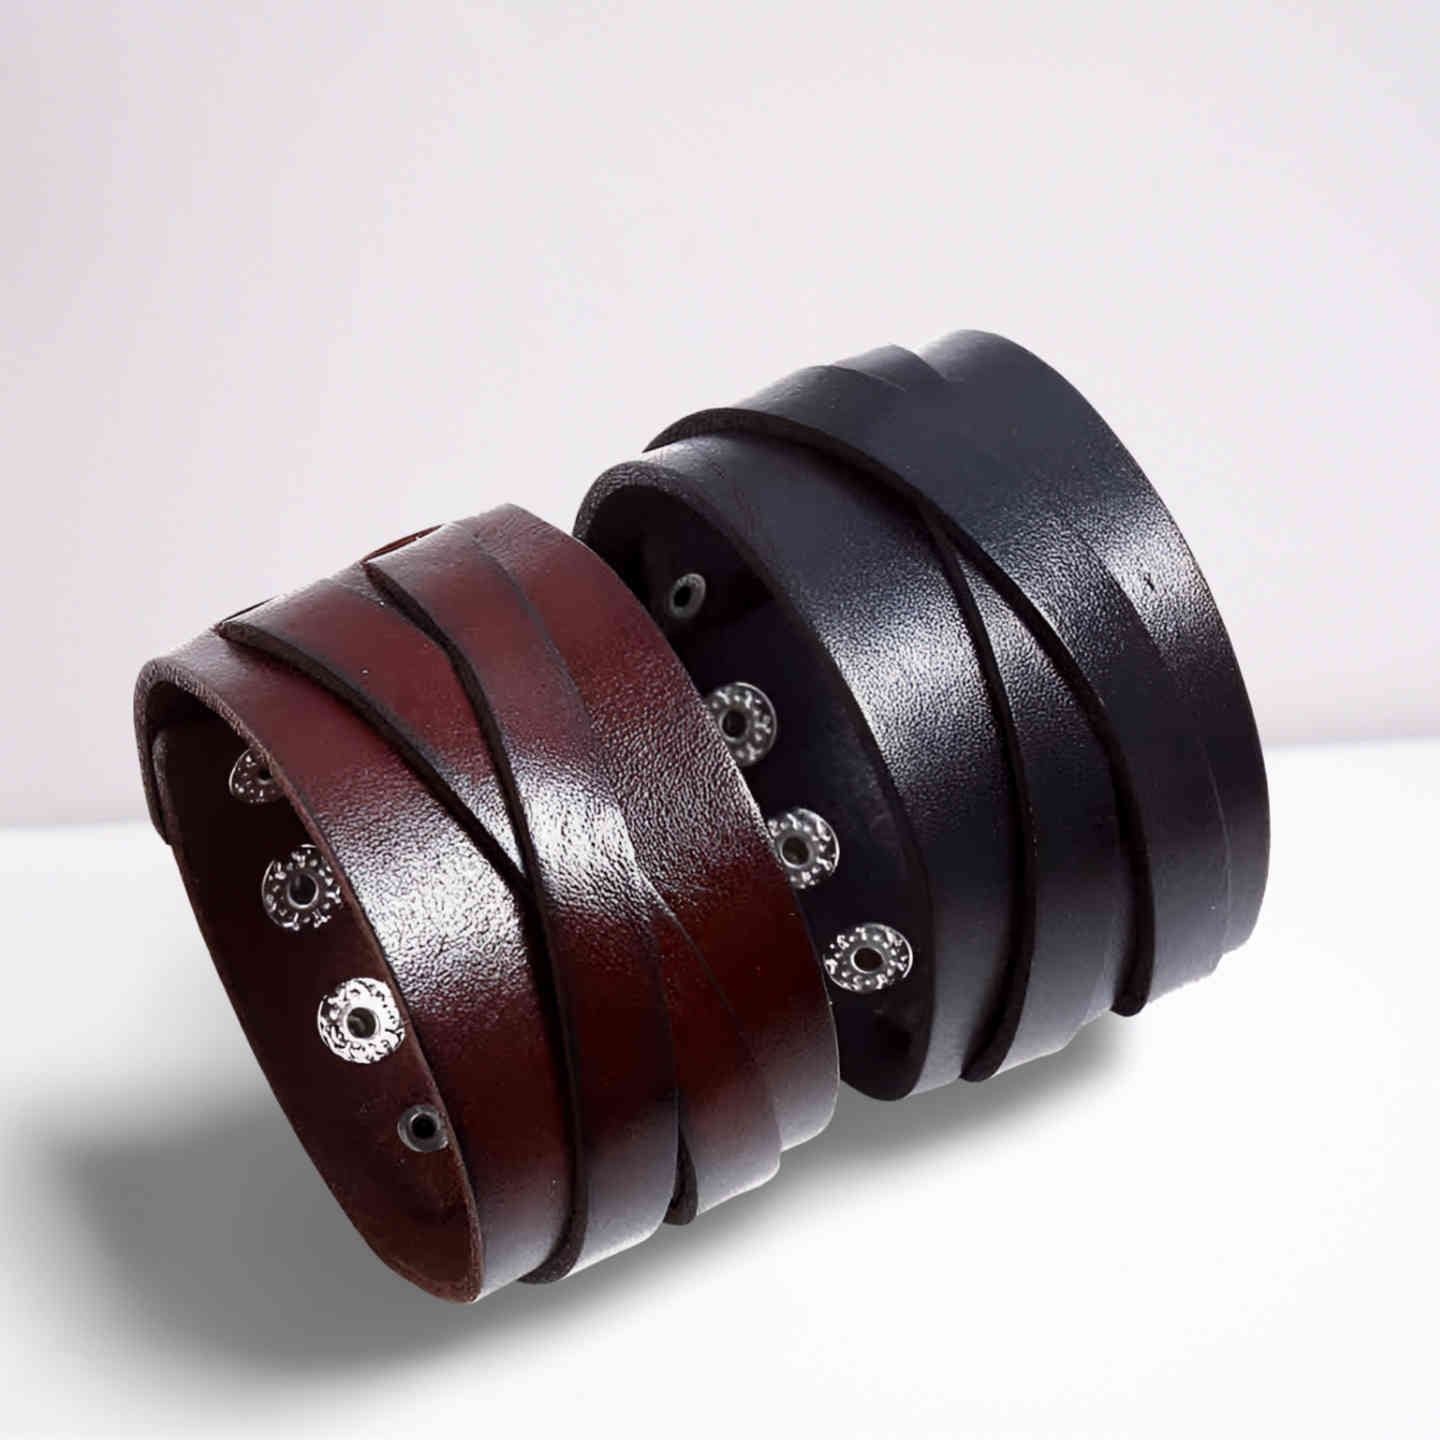 Buy Brown Leather Cuff Bracelet Nice Gift for Women Great Online in India -  Etsy